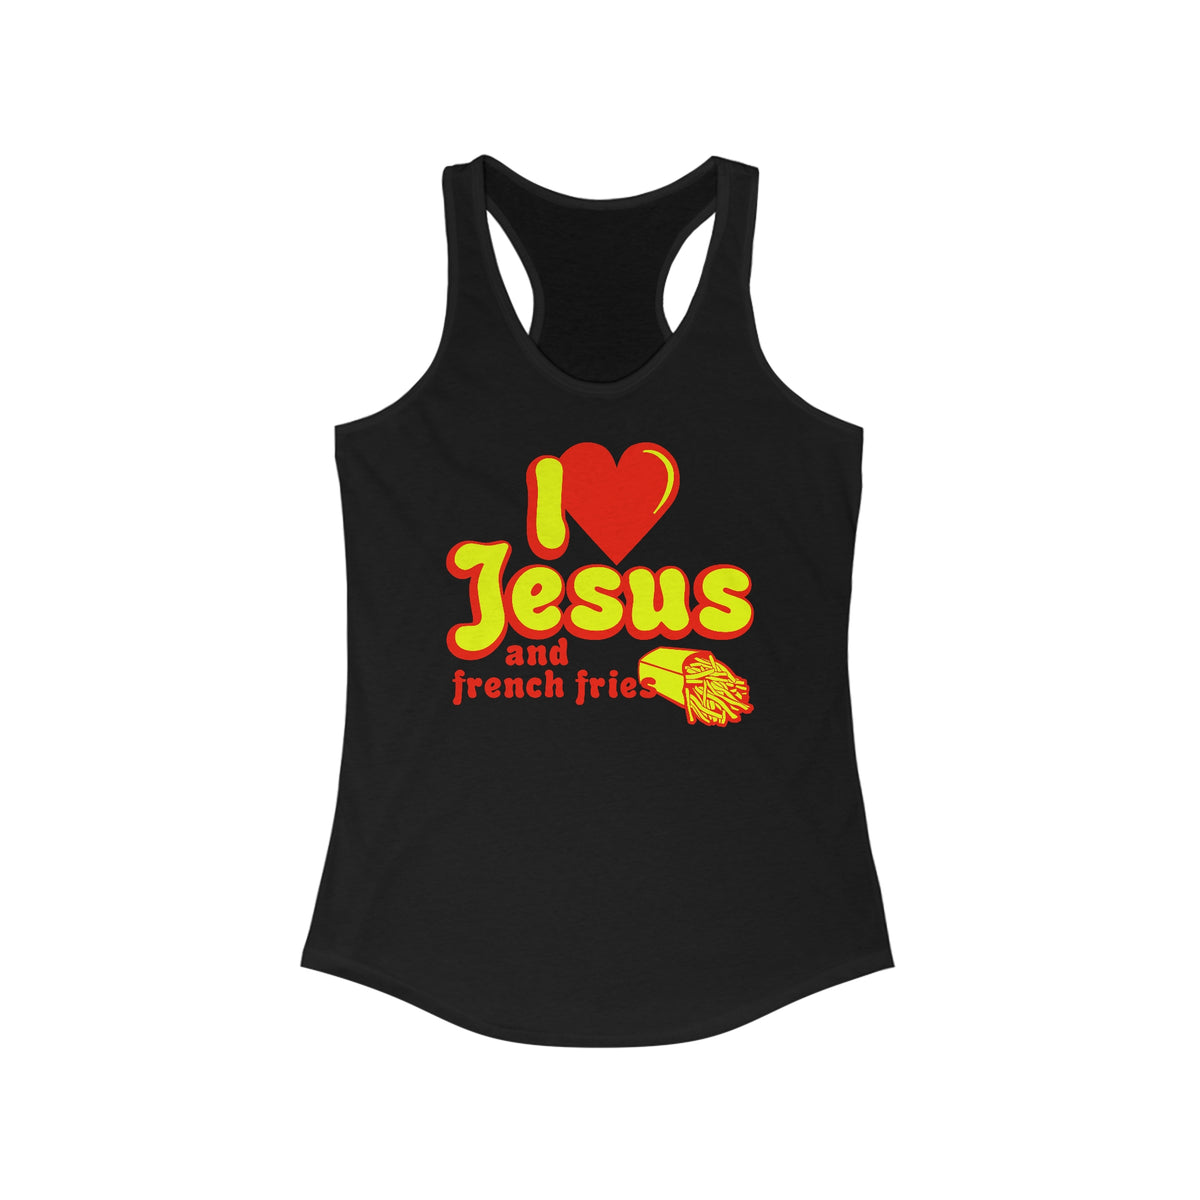 I Heart Jesus (And French Fries) - Women’s Racerback Tank